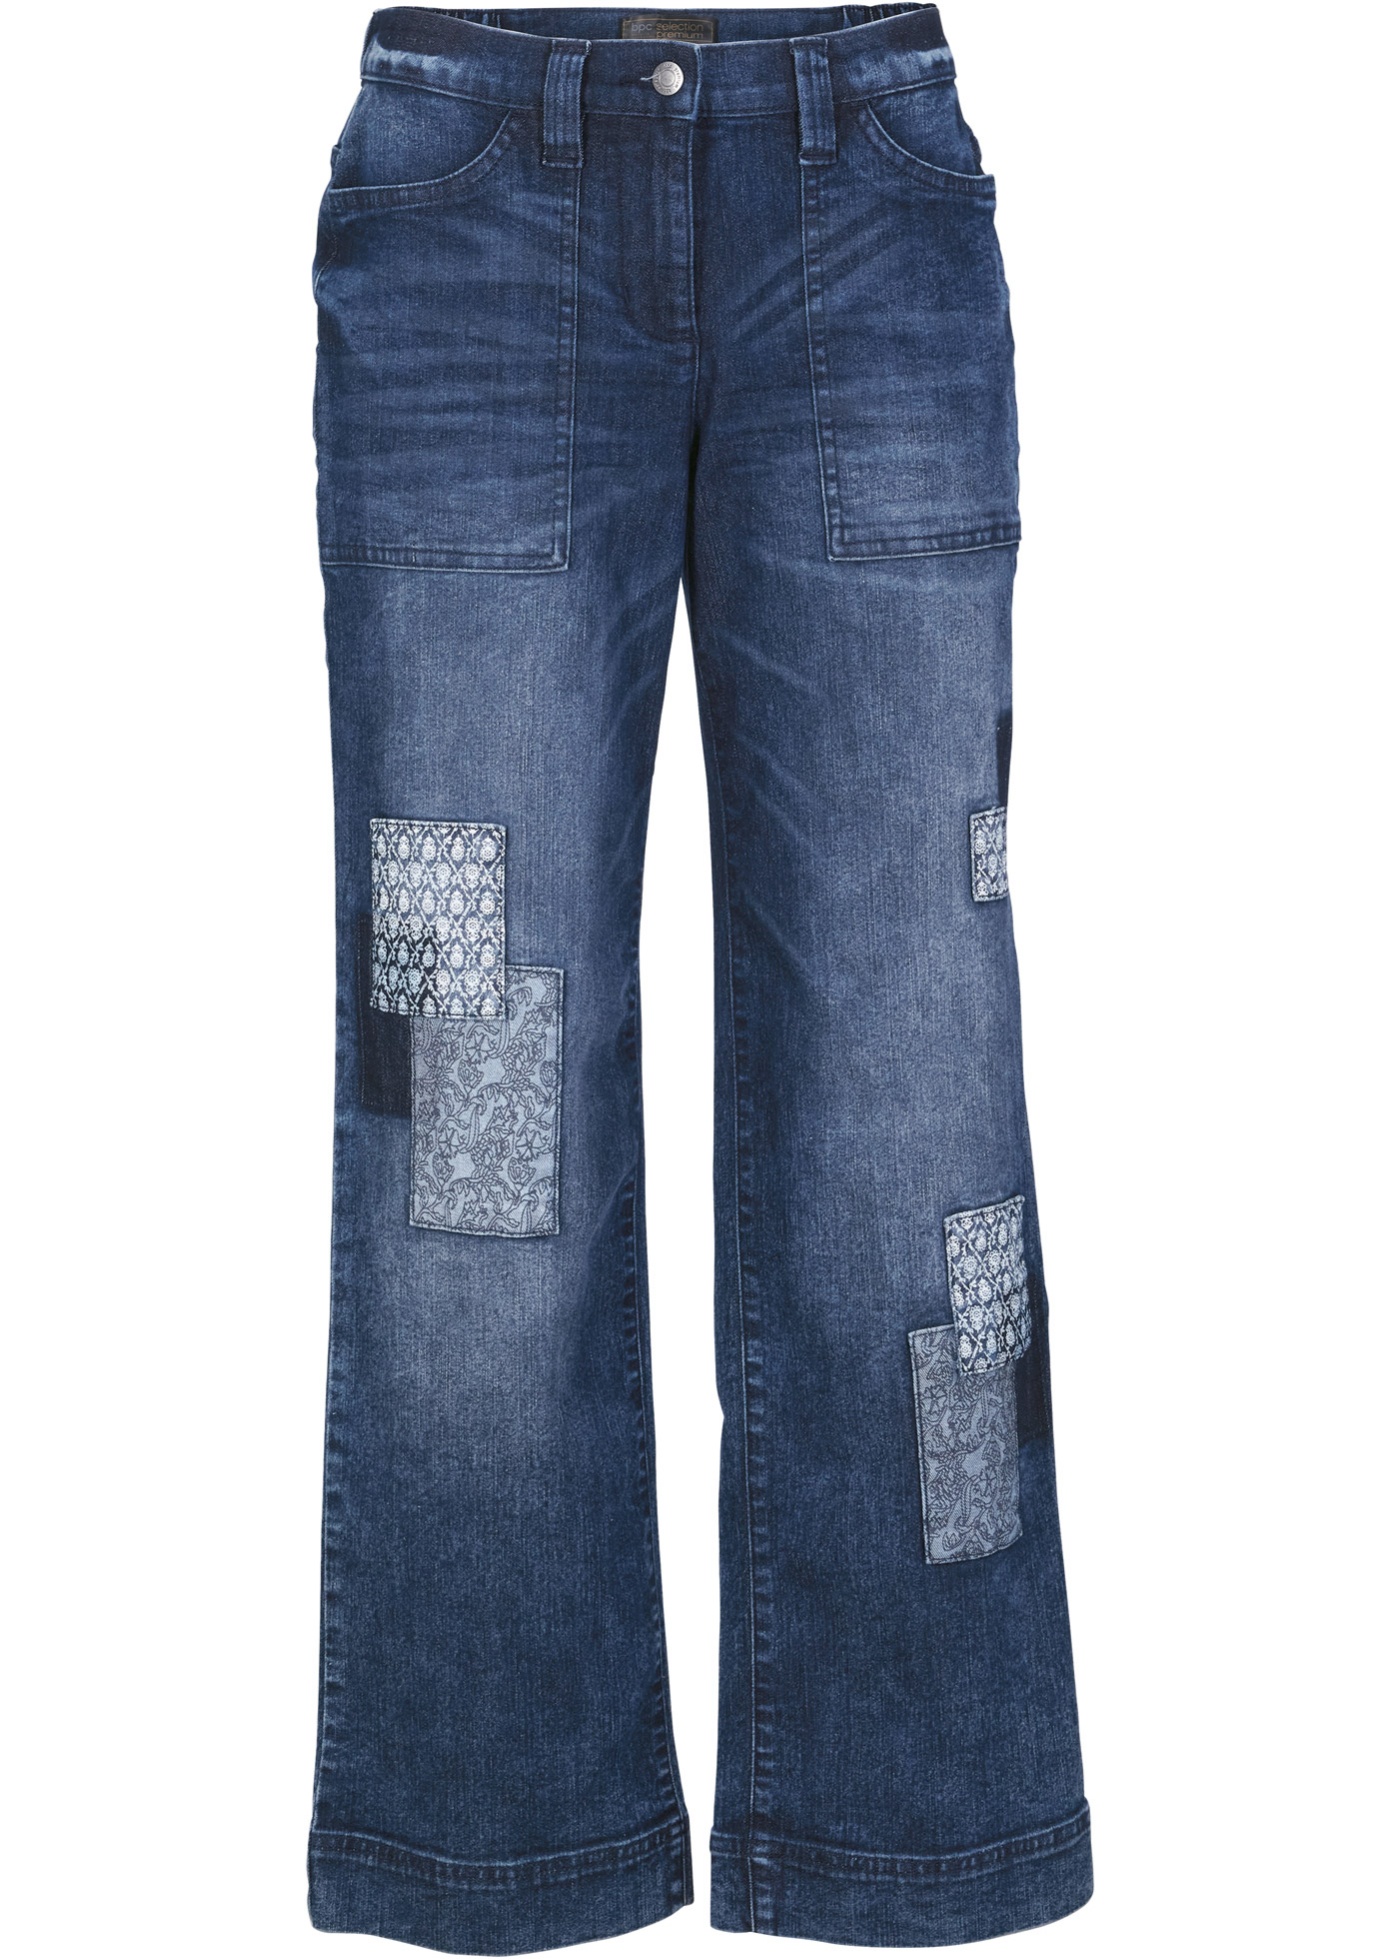 Jeans-Culotte gepatcht